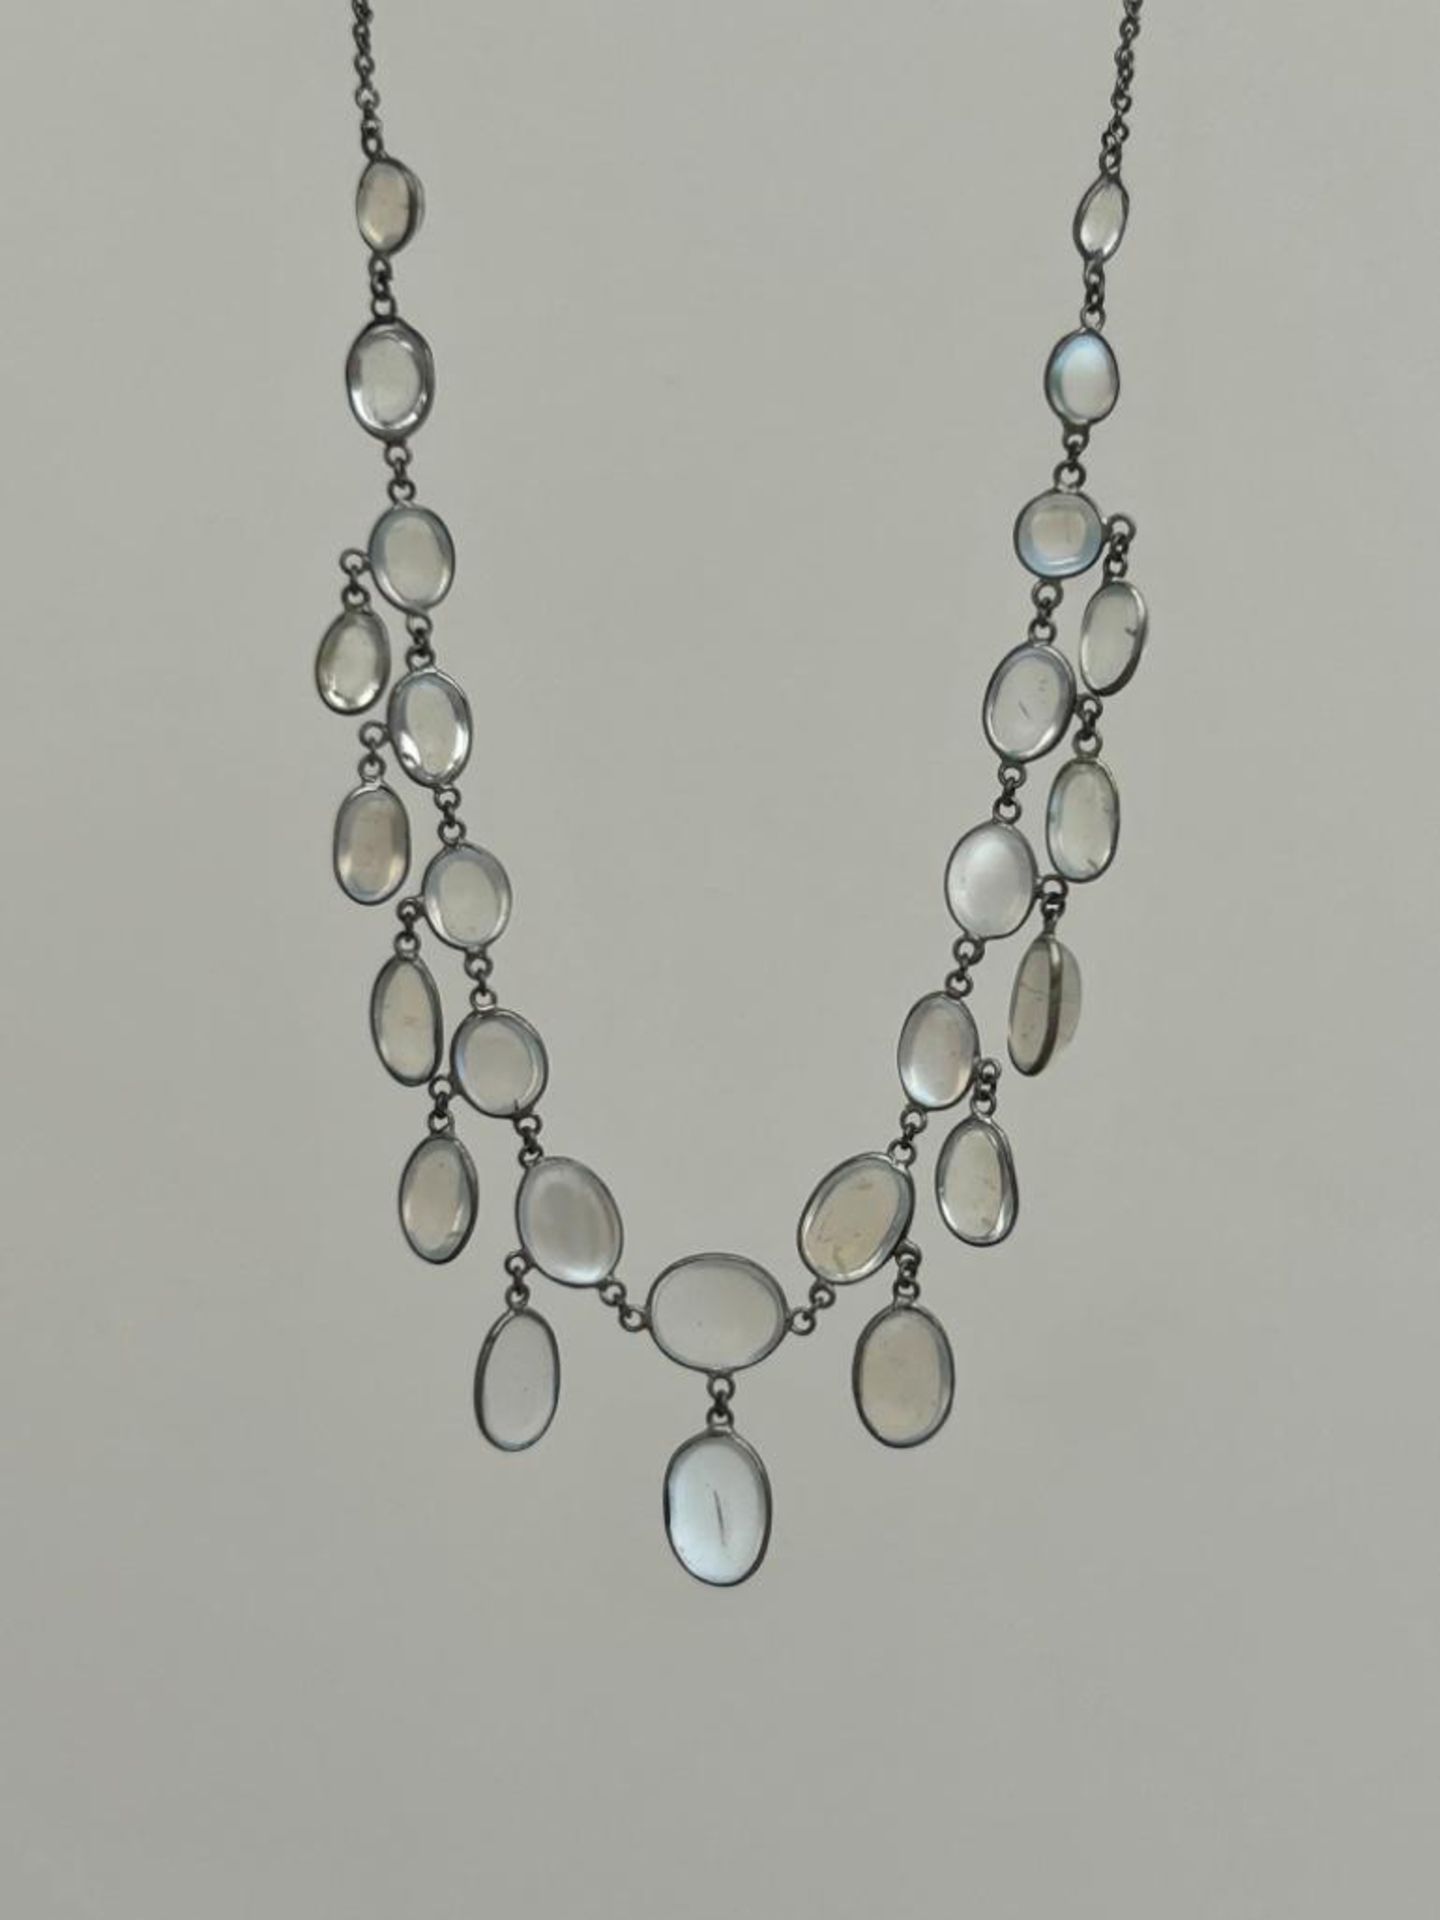 Antique Silver Moonstone Necklace - Image 5 of 7